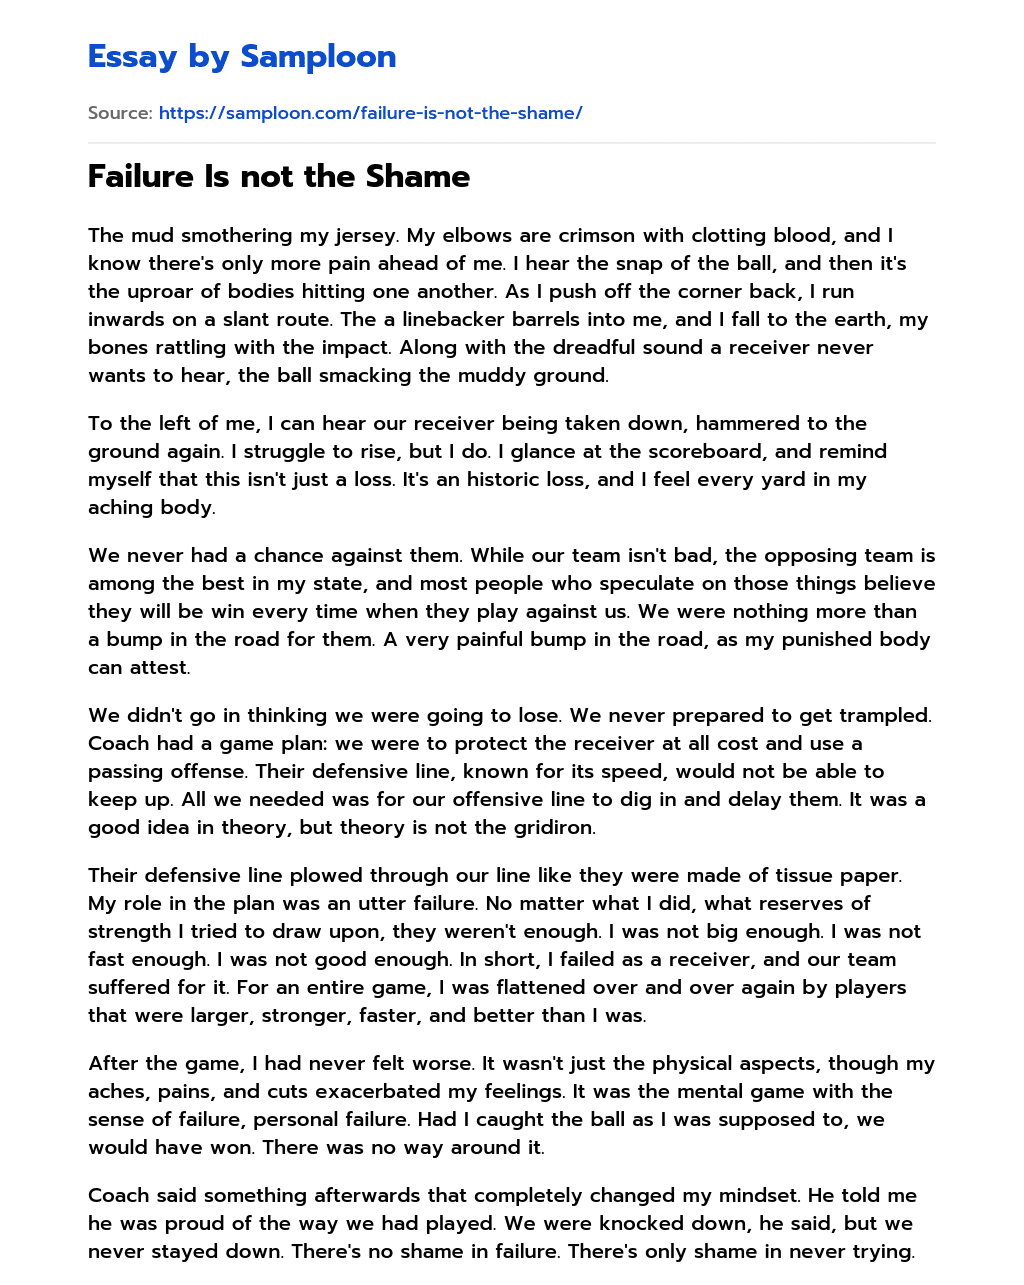 Failure Is not the Shame essay